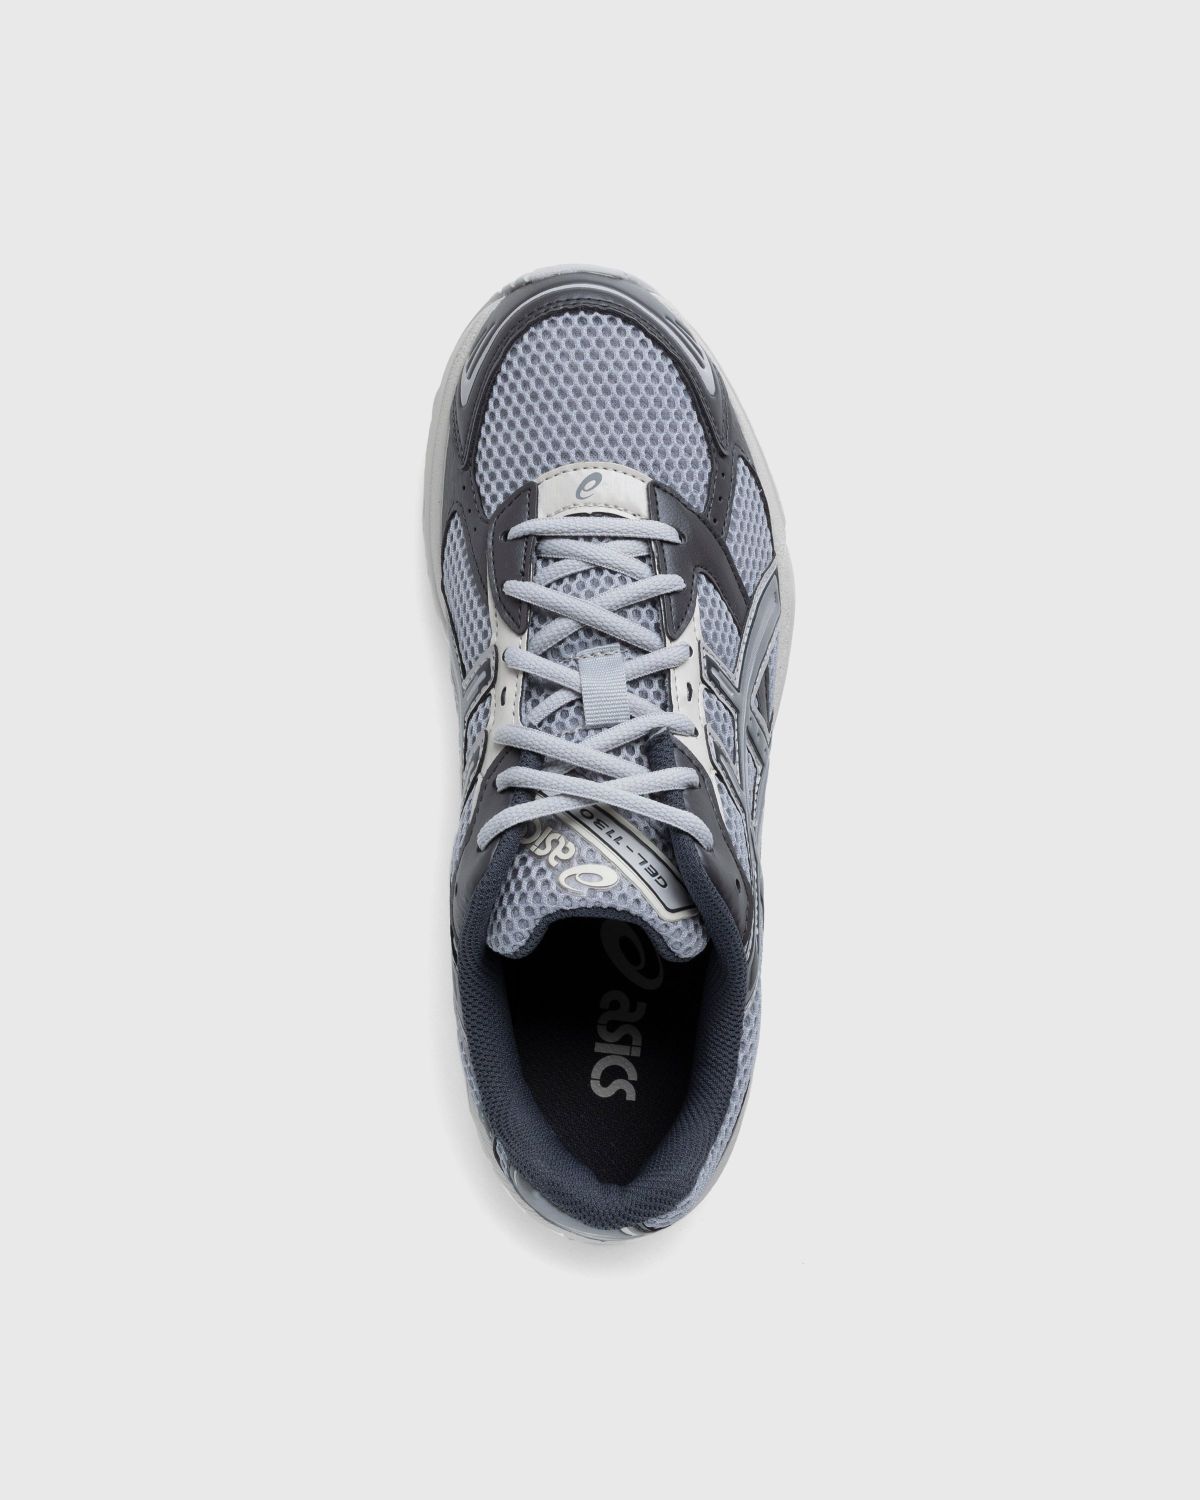 asics – Gel-1130 Oyster Grey/Clay Grey - Sneakers - Grey - Image 4